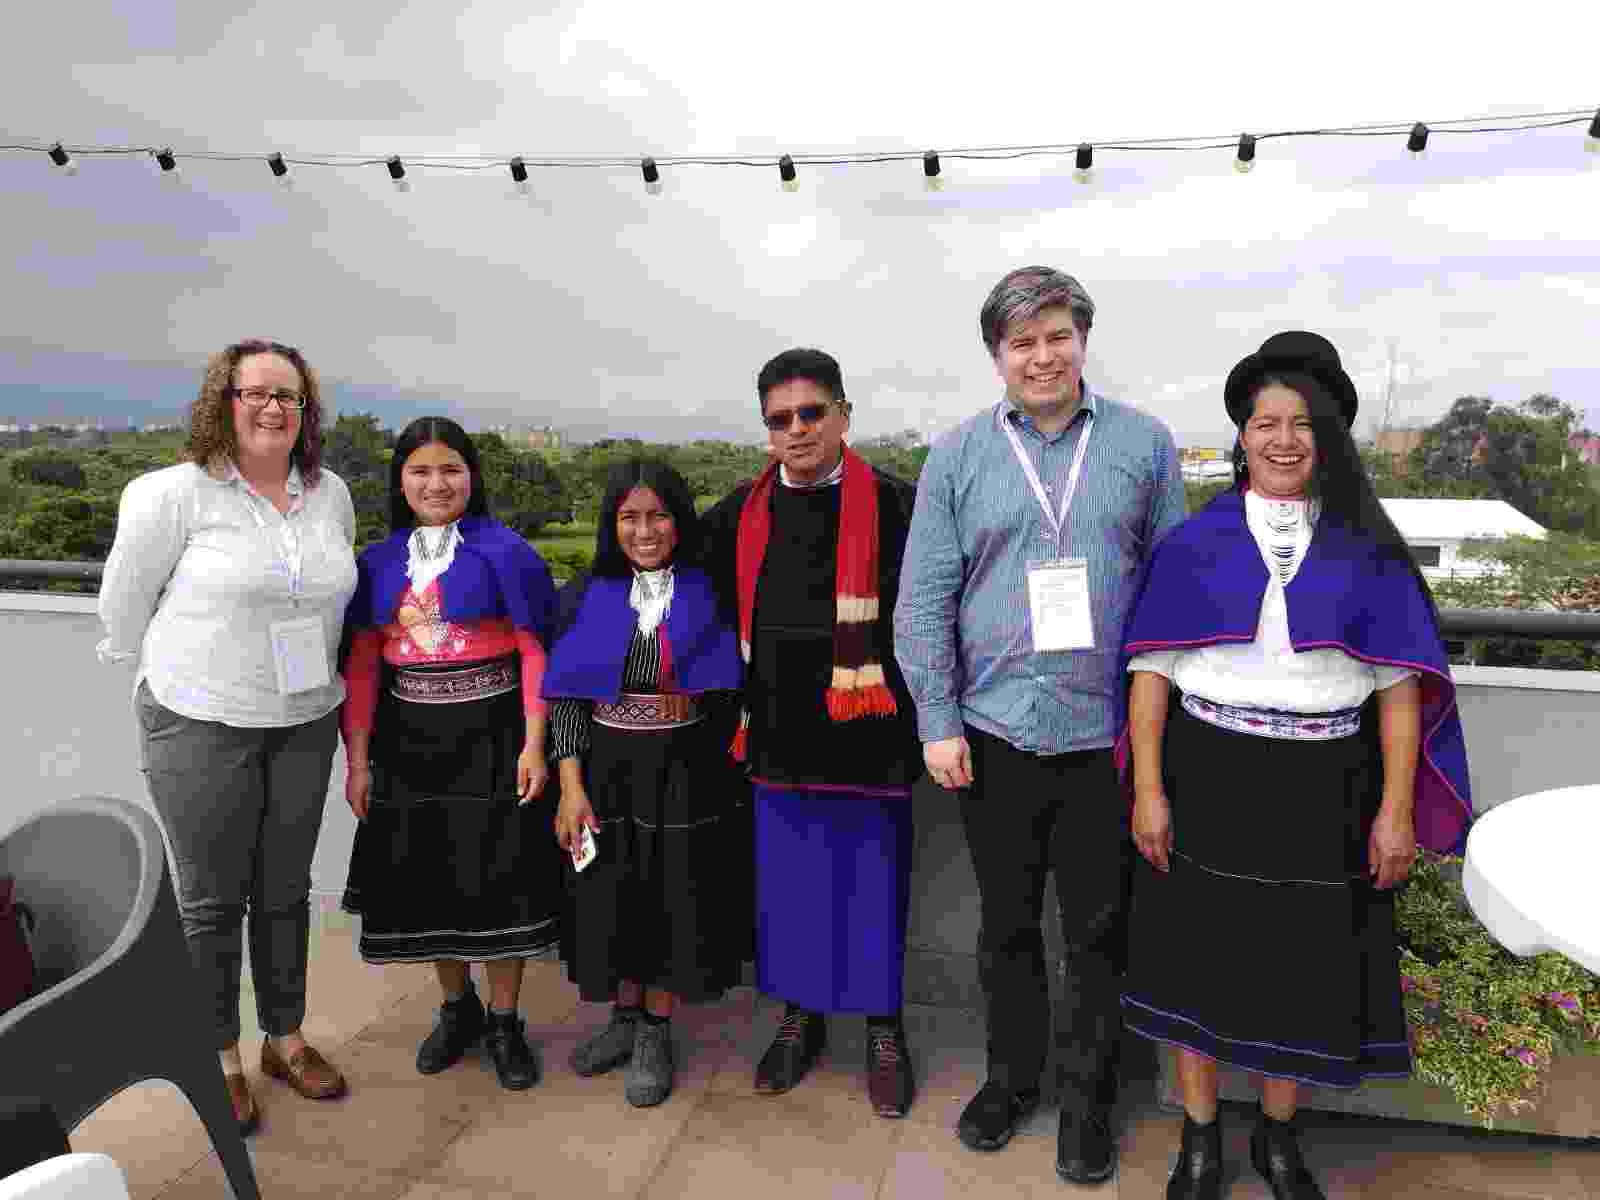 Four members of the Misak indigenous community wearing traditional dress in Colombia smiling and standing together with Claire and Rich from the Water Hub